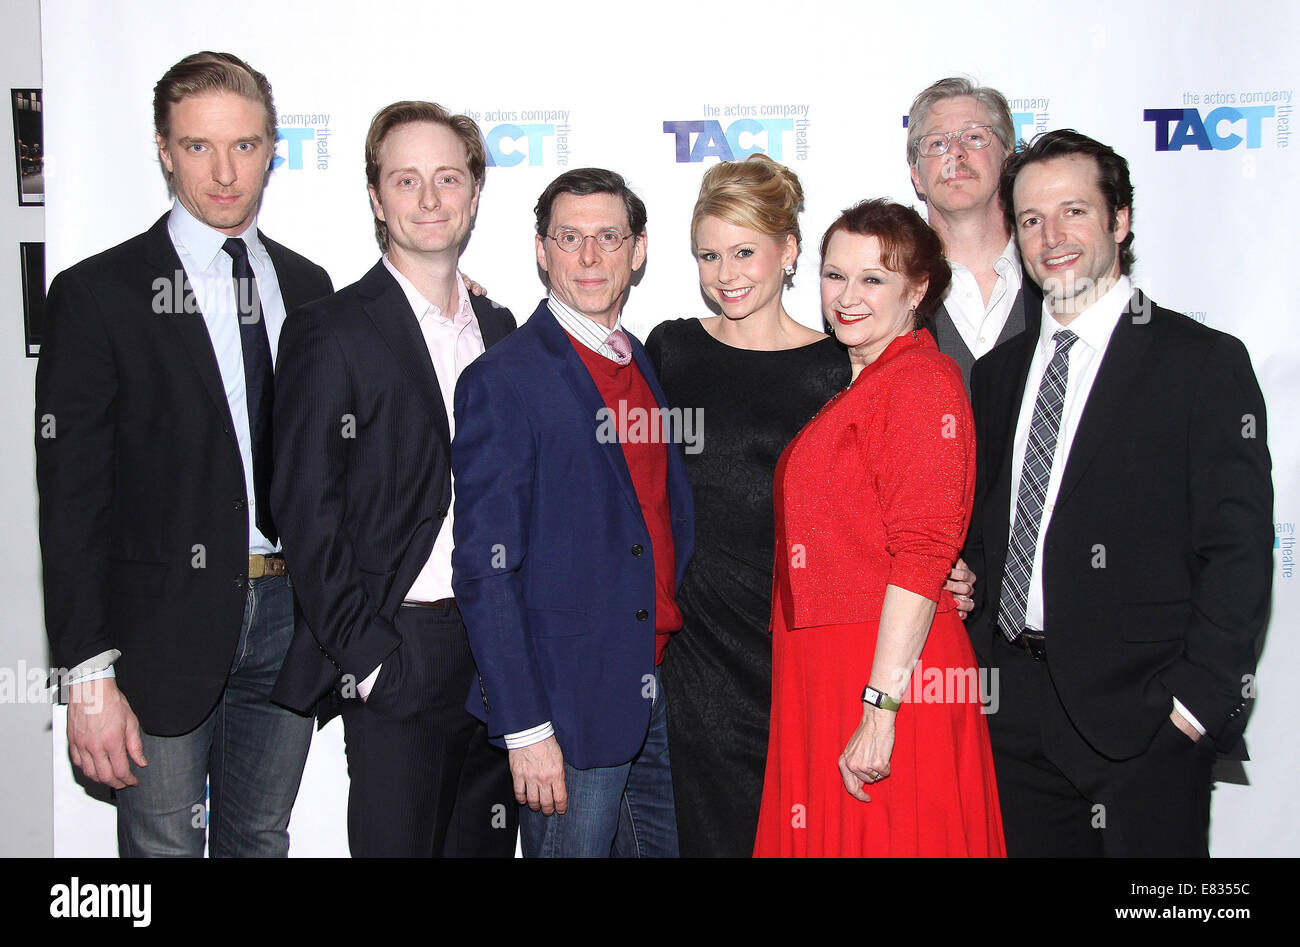 Opening night party for 'Beyond Therapy' at the Beckett Theatre - Arrivals.  Featuring: Michael Schantz,Jeffrey C. Hawkins,Scott Alan Evans,Liv Rooth,Cynthia Darlow,Karl Kenzler,Mark Alhadeff Where: New York, New York, United States When: 25 Mar 2014 Stock Photo